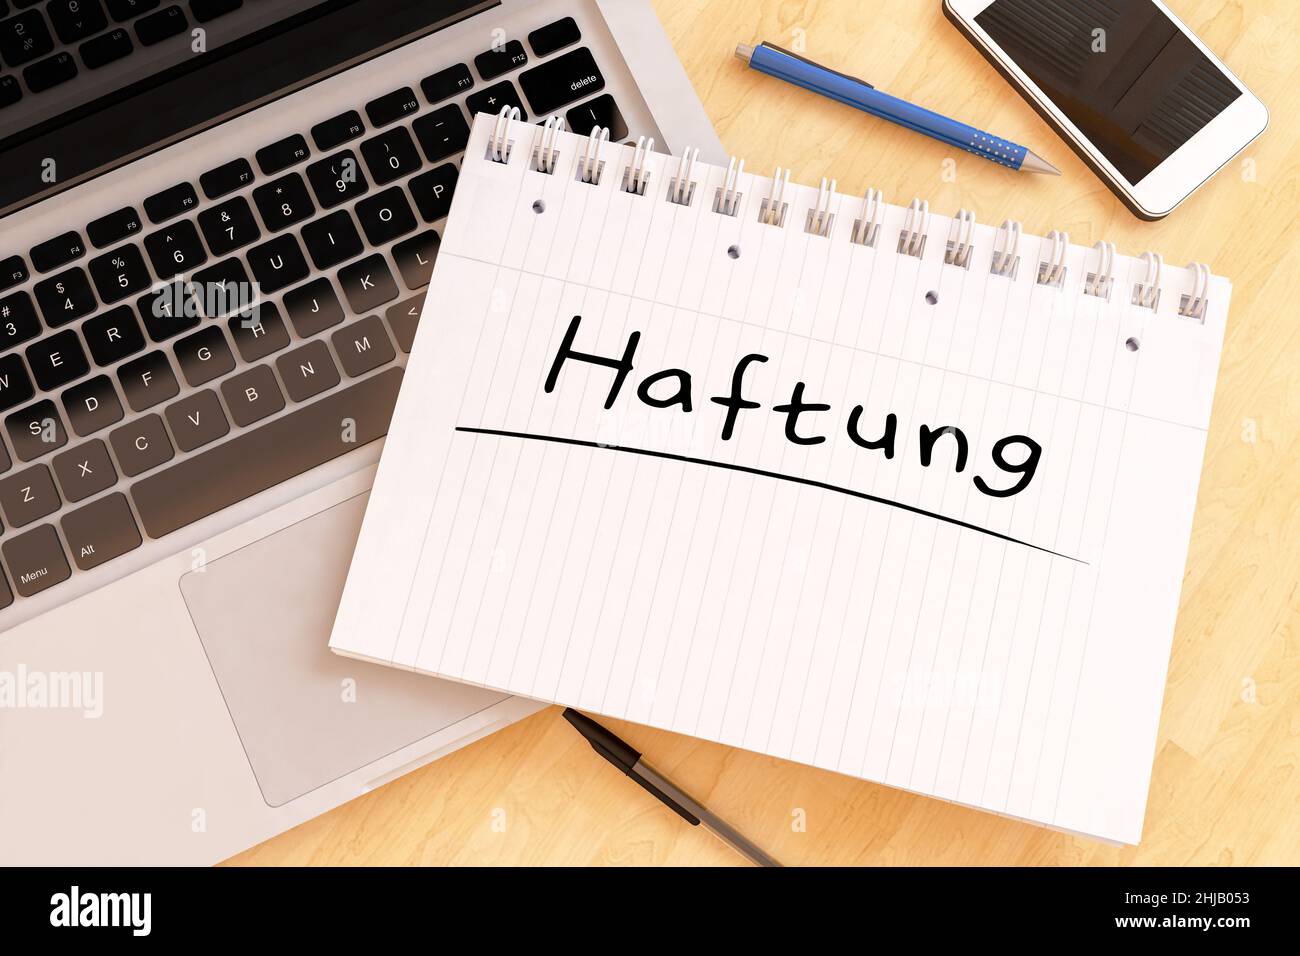 Haftung - german word for liability - handwritten text in a notebook on a desk - 3d render illustration. Stock Photo